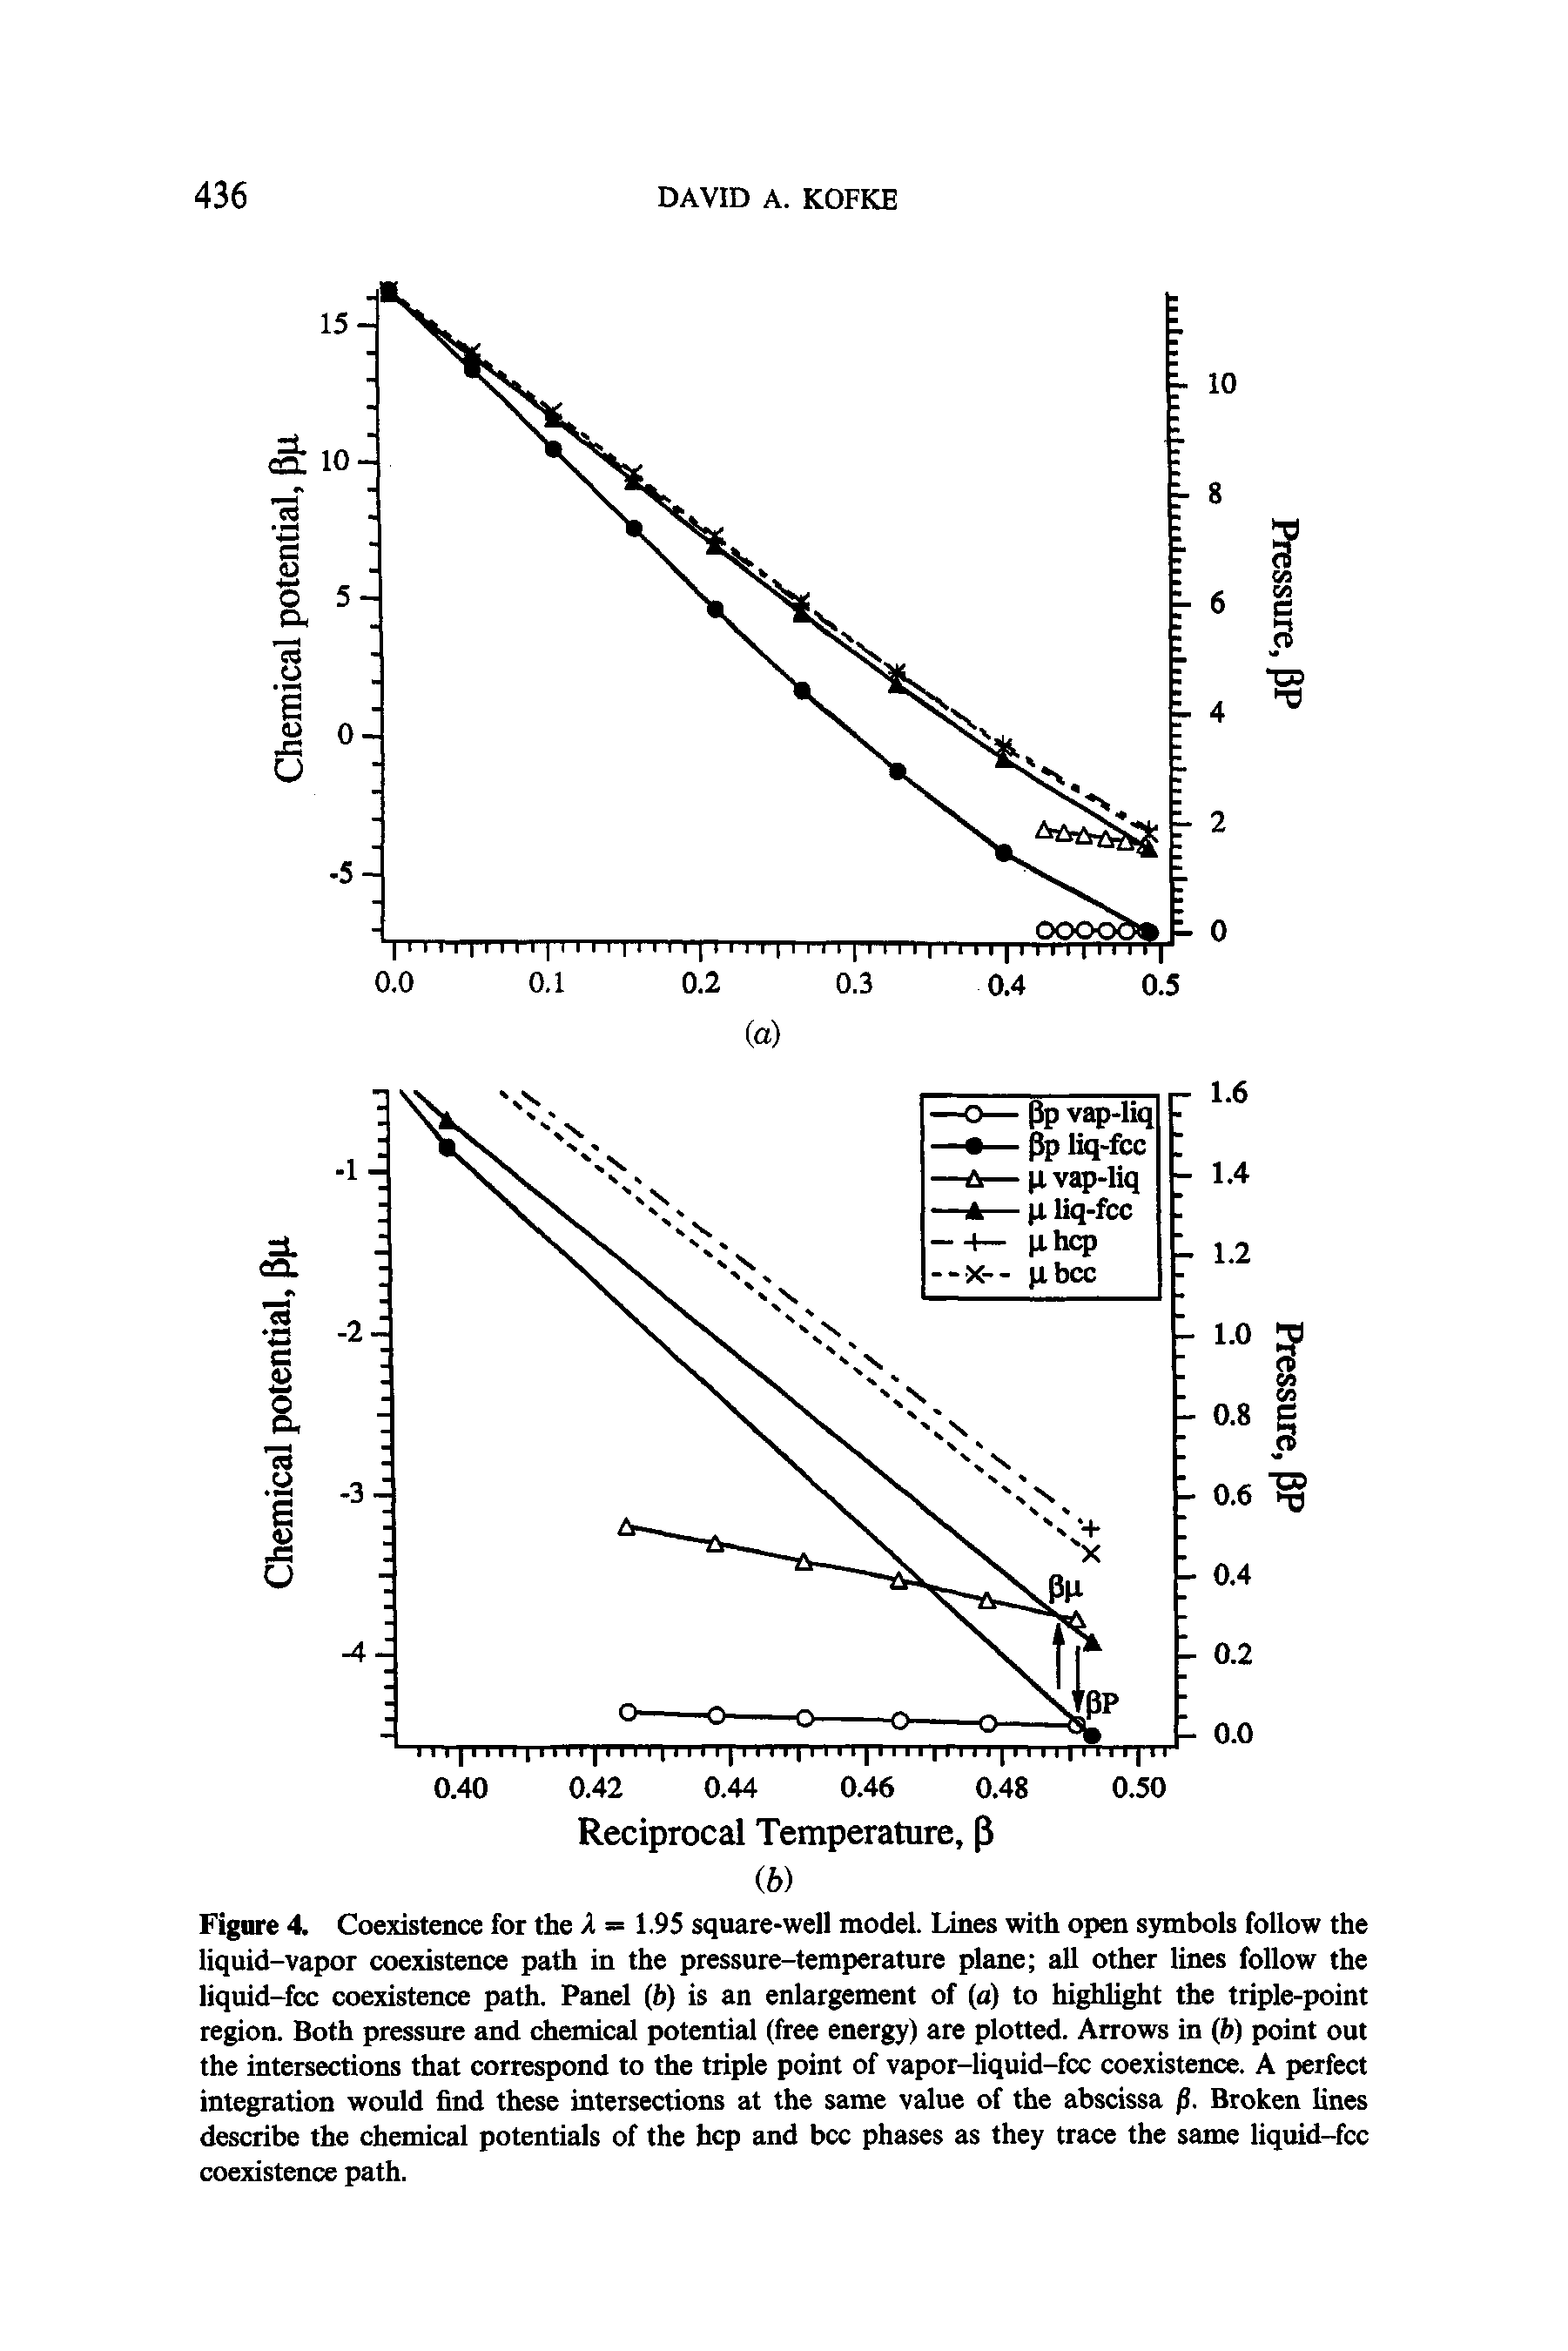 Figure 4 Coexistence for the A = 1.95 square-well model Lines with open symbols follow the liquid-vapor coexistence path in the pressure-temperature plane all other lines follow the liquid-fcc coexistence path. Panel (ft) is an enlargement of (a) to highlight the triple-point region. Both pressure and chemical potential (free energy) are plotted. Arrows in (ft) point out the intersections that correspond to the triple point of vapor-liquid-fcc coexistence. A perfect integration would find these intersections at the same value of the abscissa / . Broken lines describe the chemical potentials of the hep and bcc phases as they trace the same liquid-fcc coexistence path.